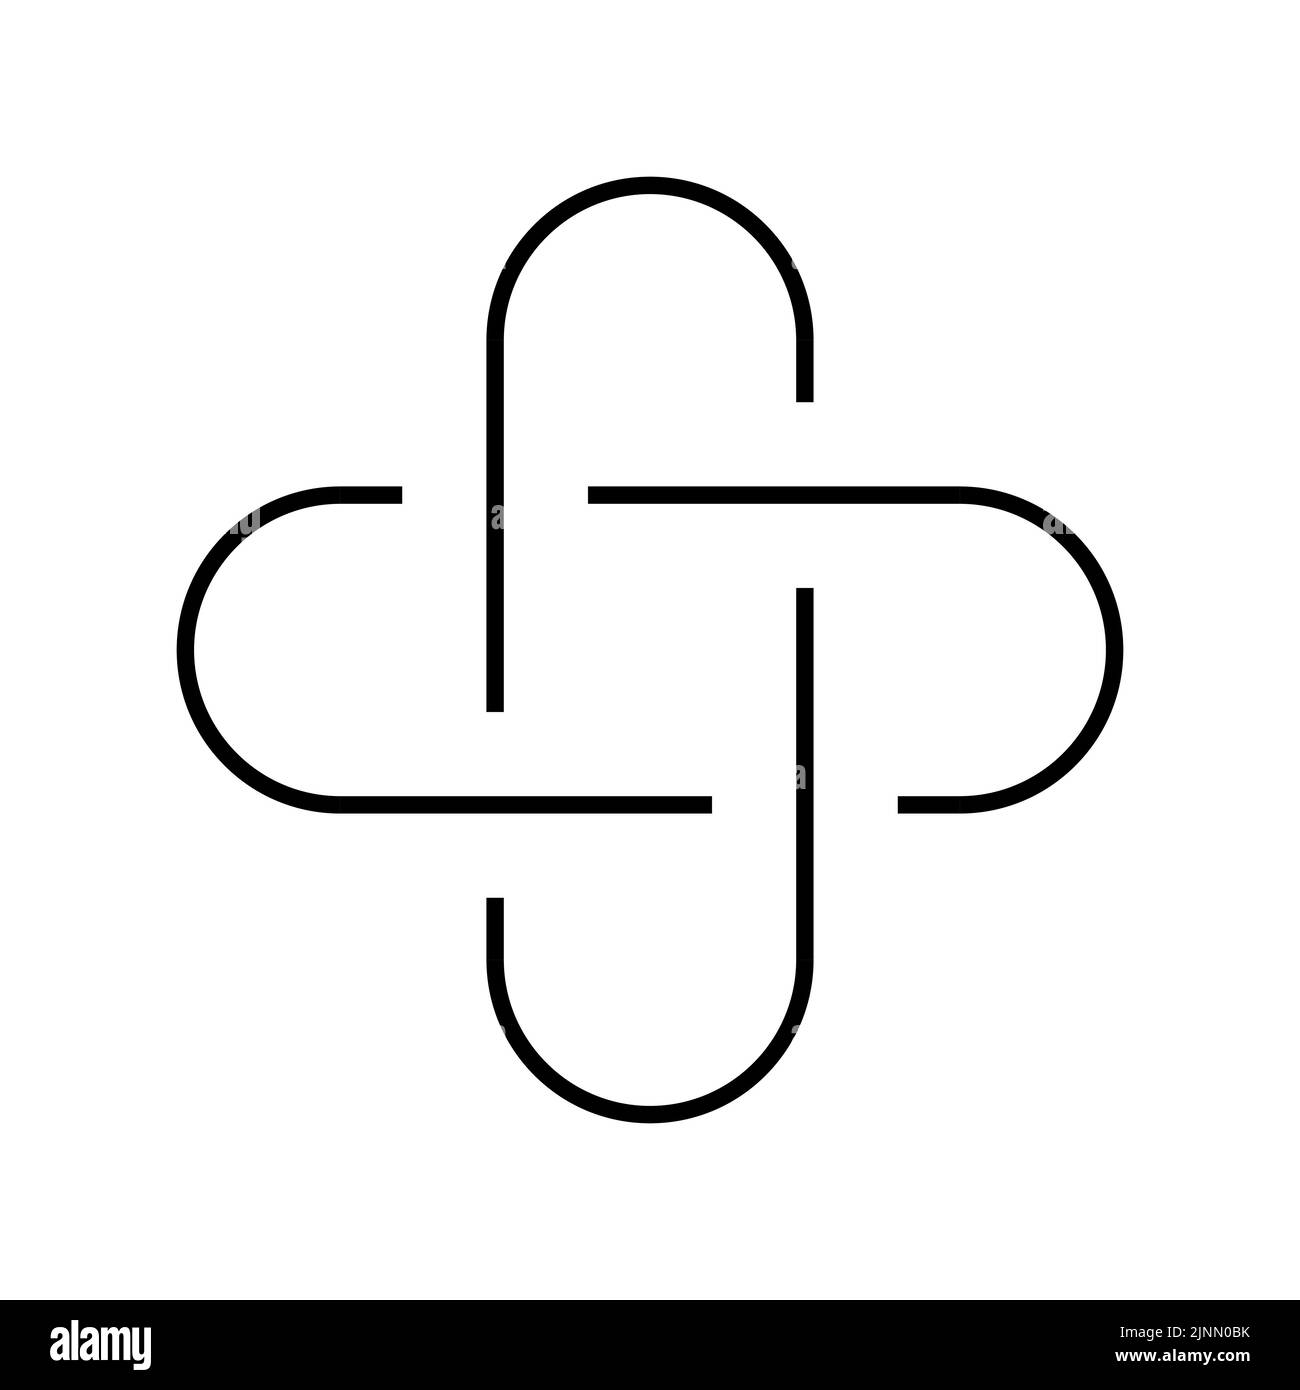 Two intertwined loops vector sign Stock Vector